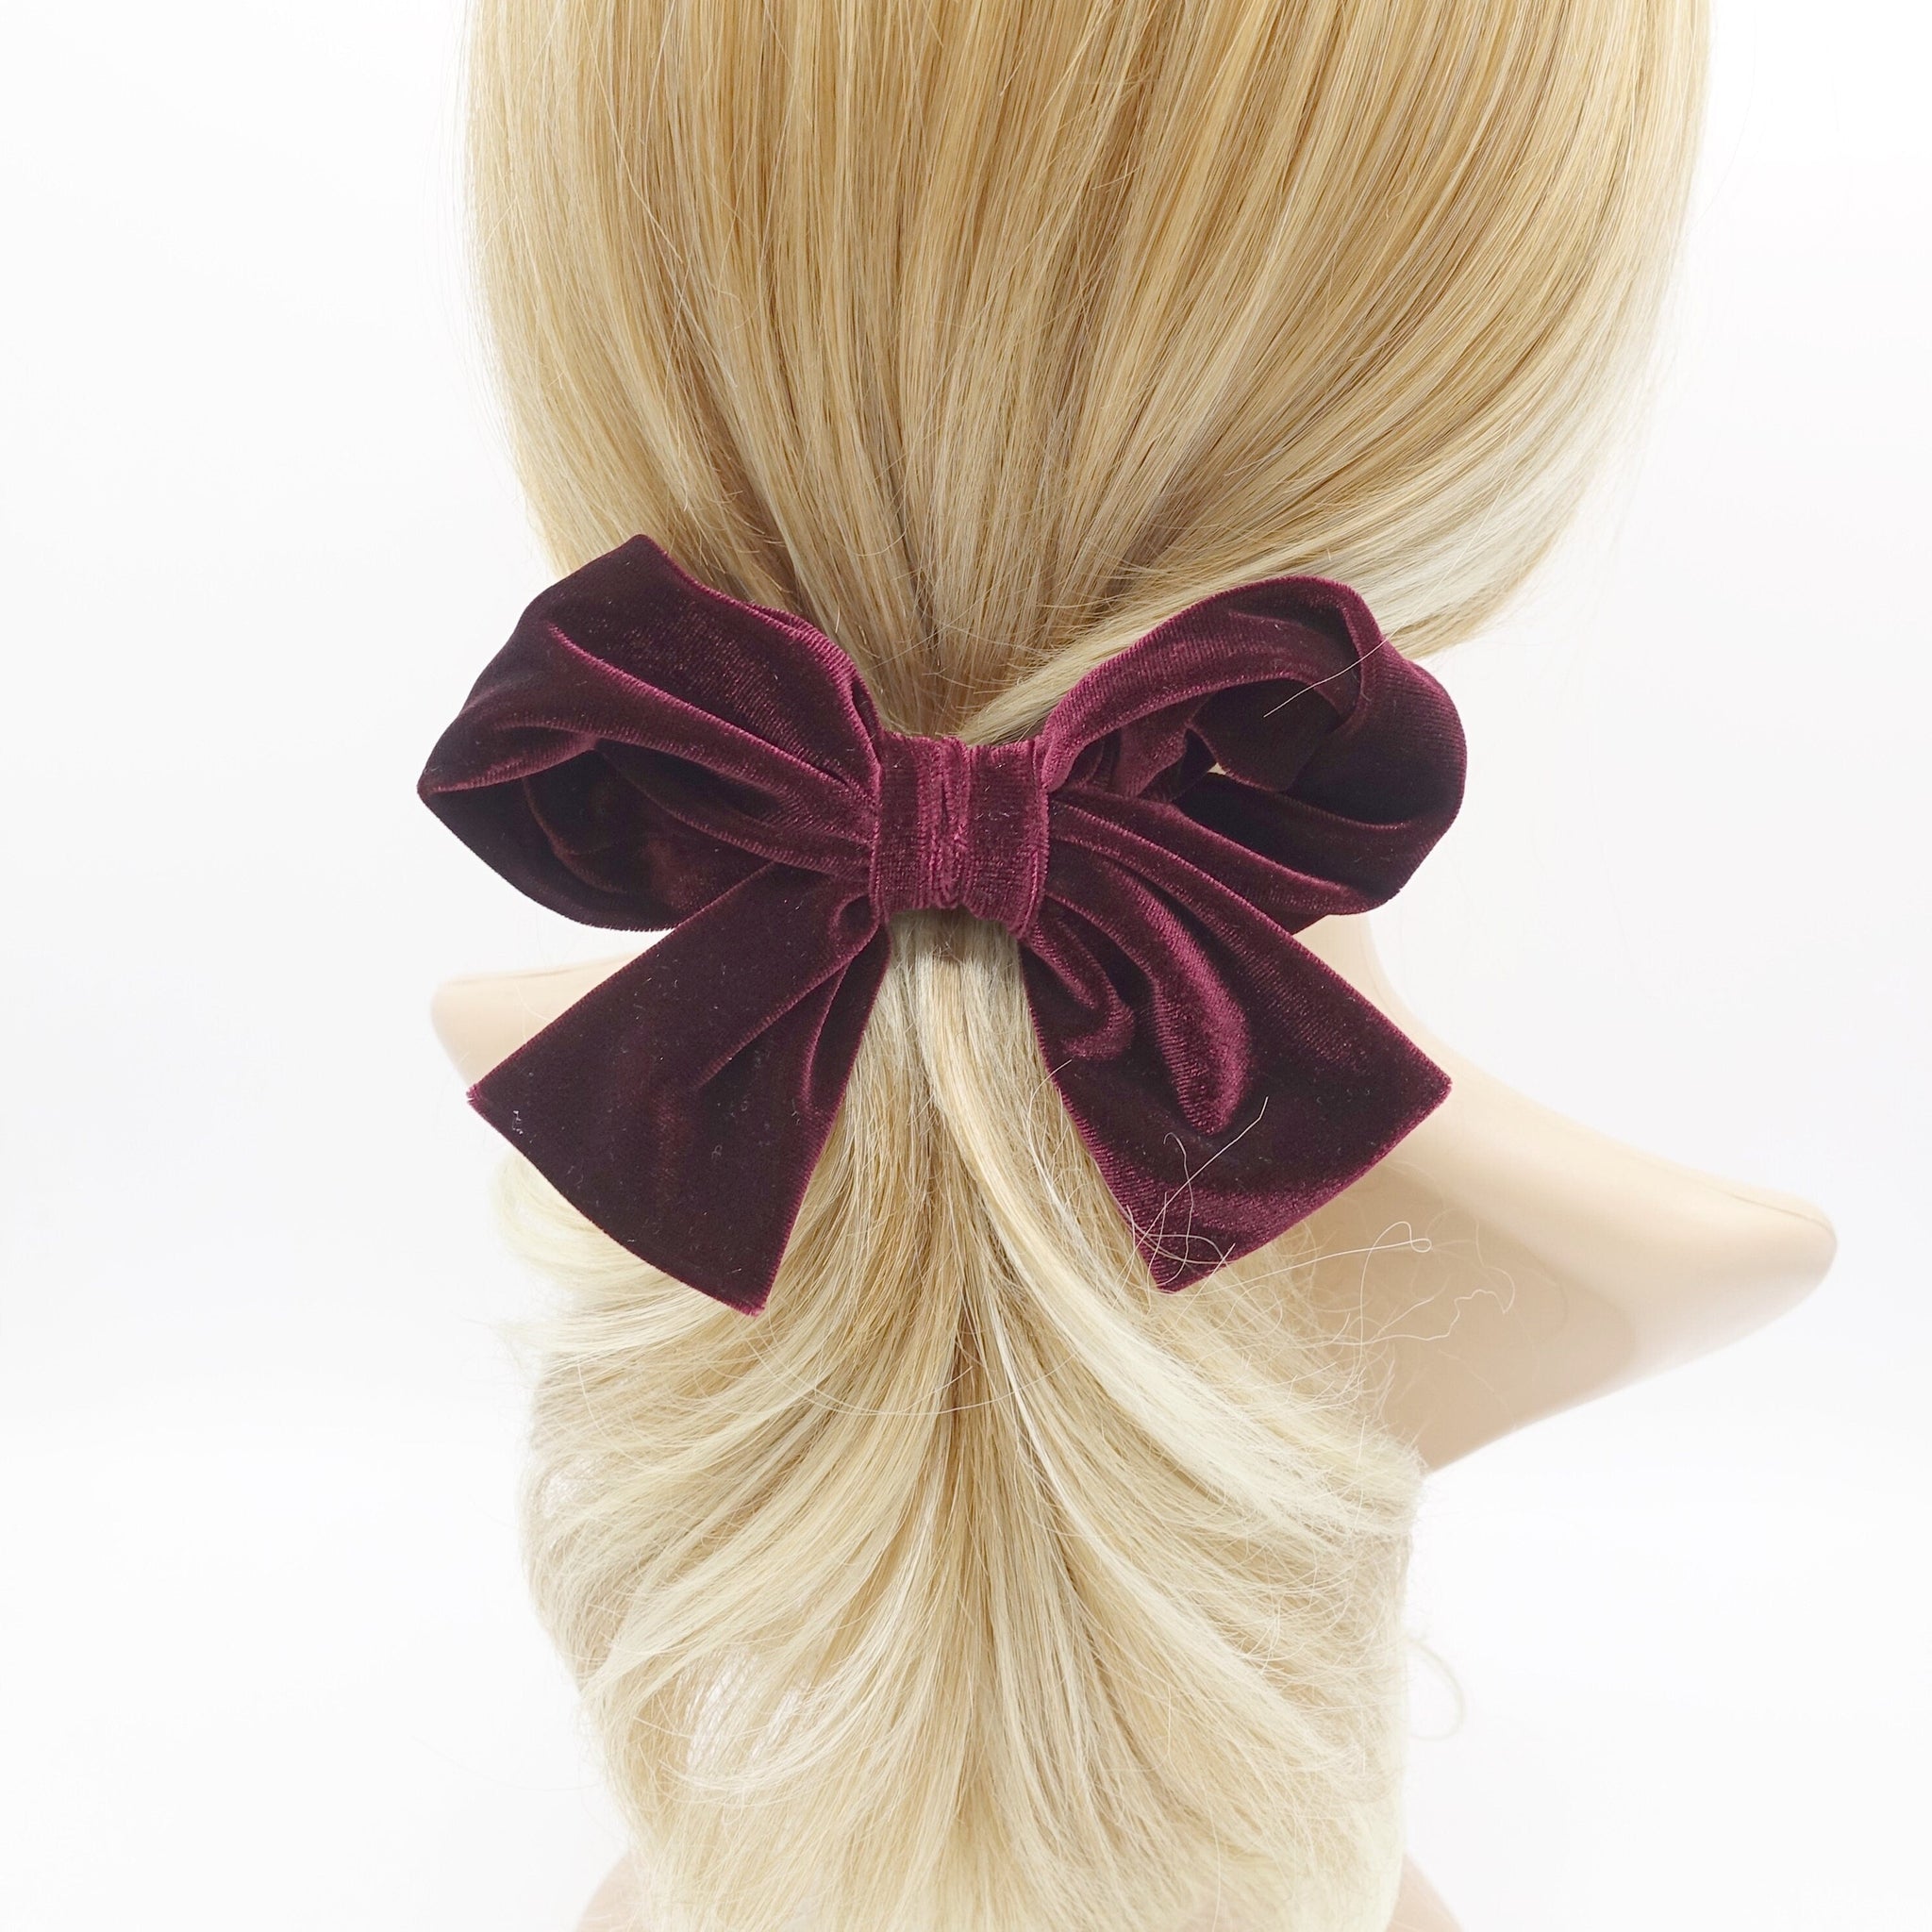 veryshine.com Barrette (Bow) Red wine velvet wired bow hair accessory for women